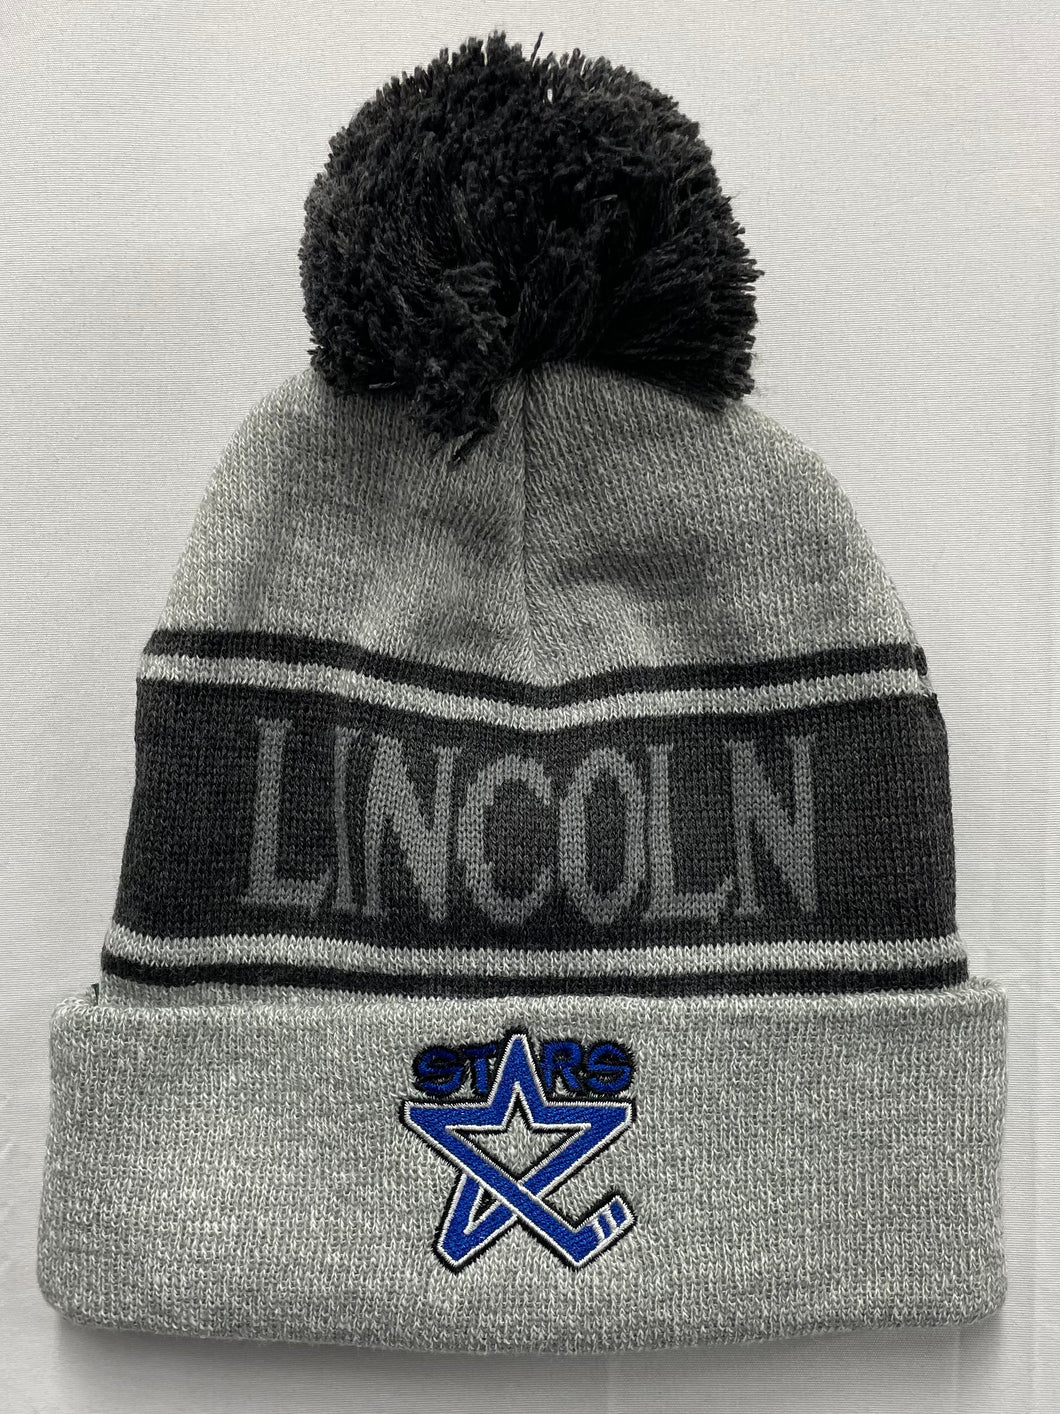 Gray and Charcoal Lincoln Stars Beanie